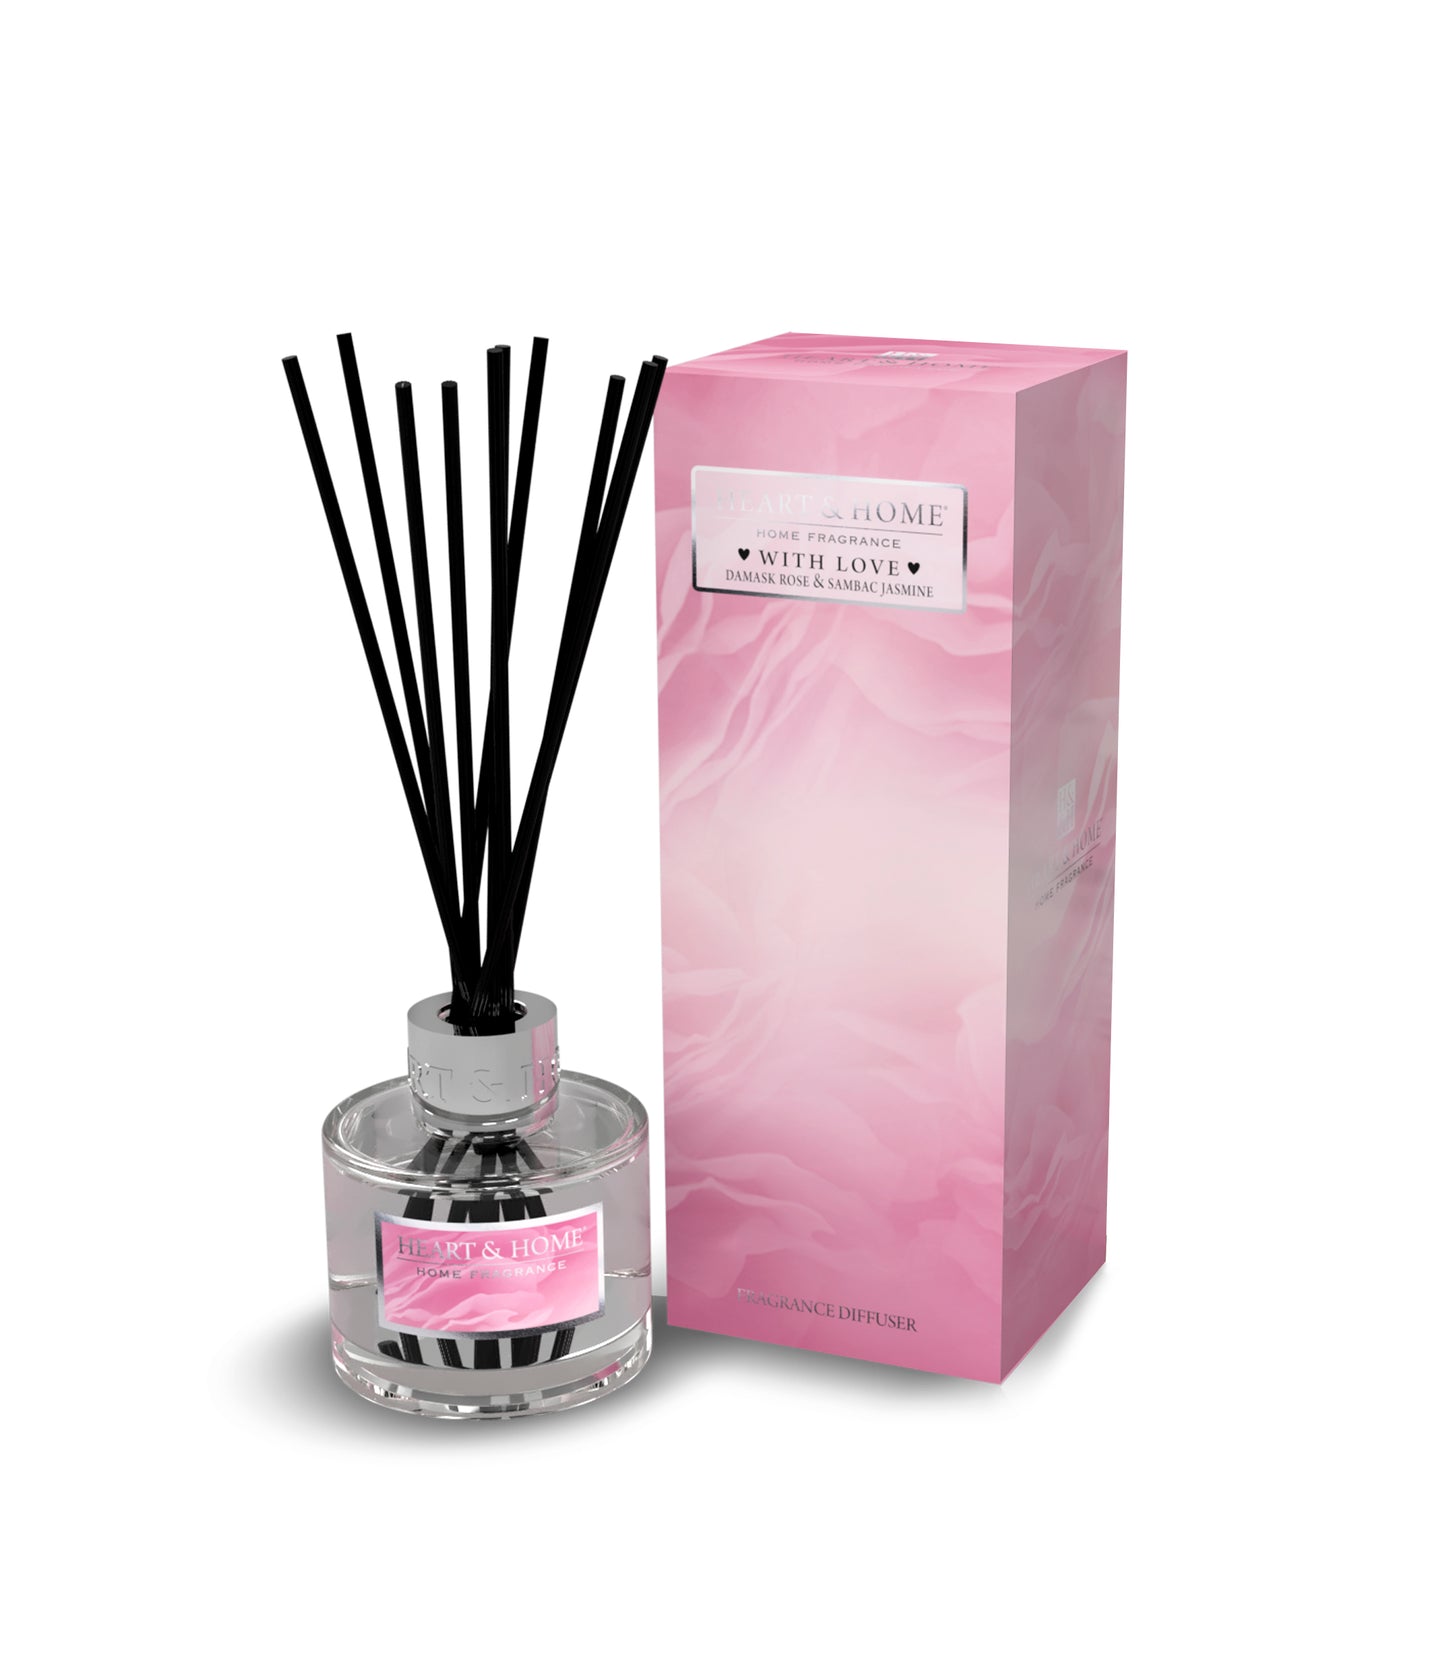 With Love Fragranced Reed Diffuser from Heart & Home Scent With Love Collection